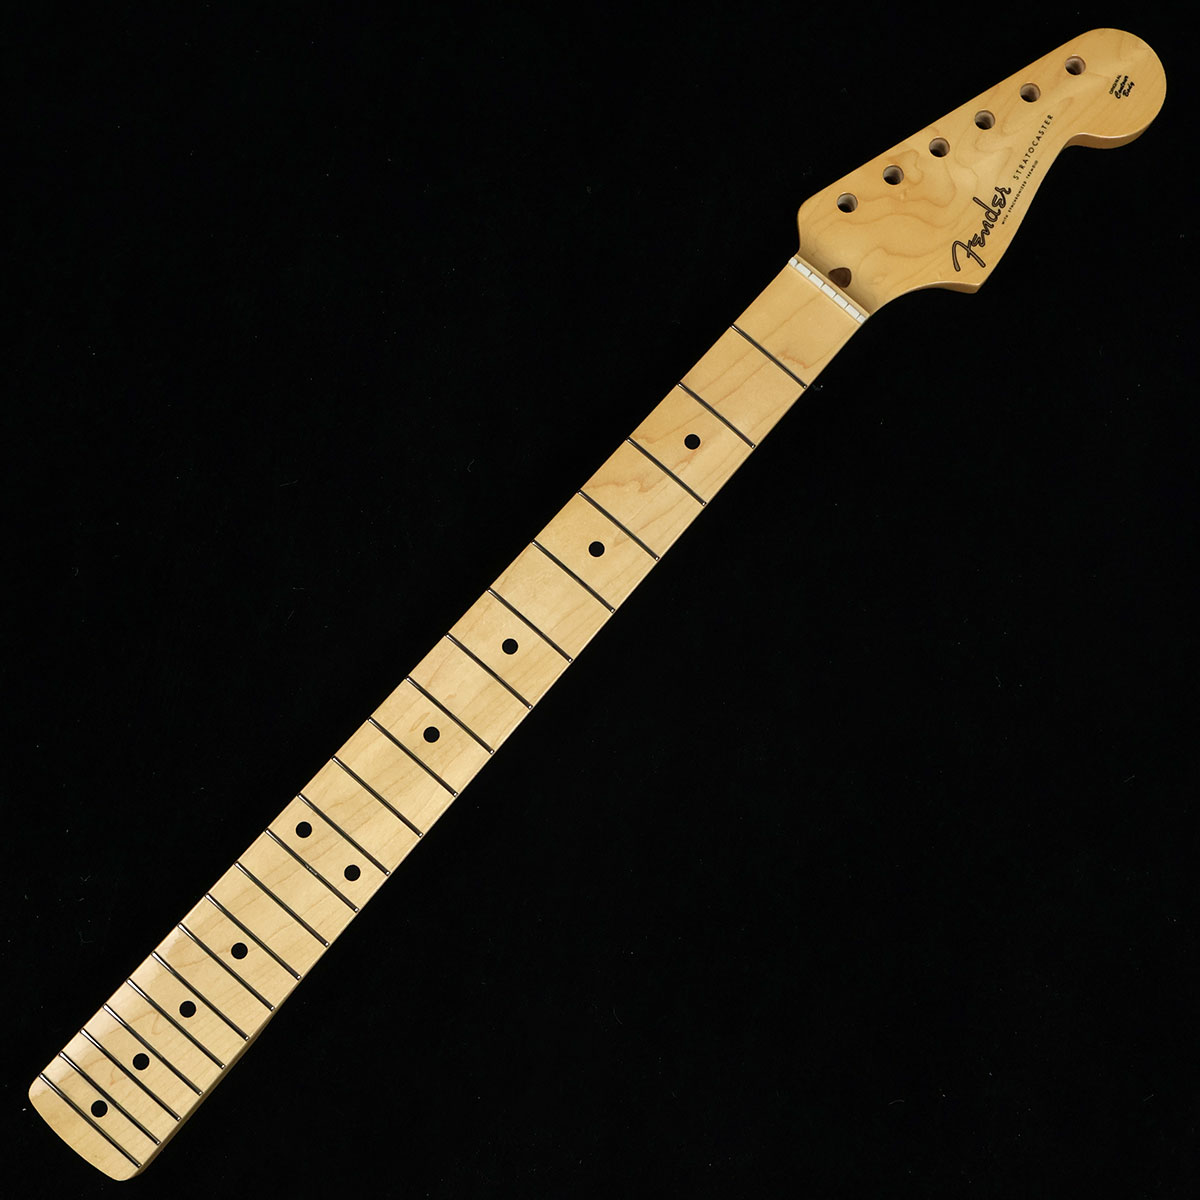 Fender Traditional II 50s Stratocaster Neck リプレイスメントネック